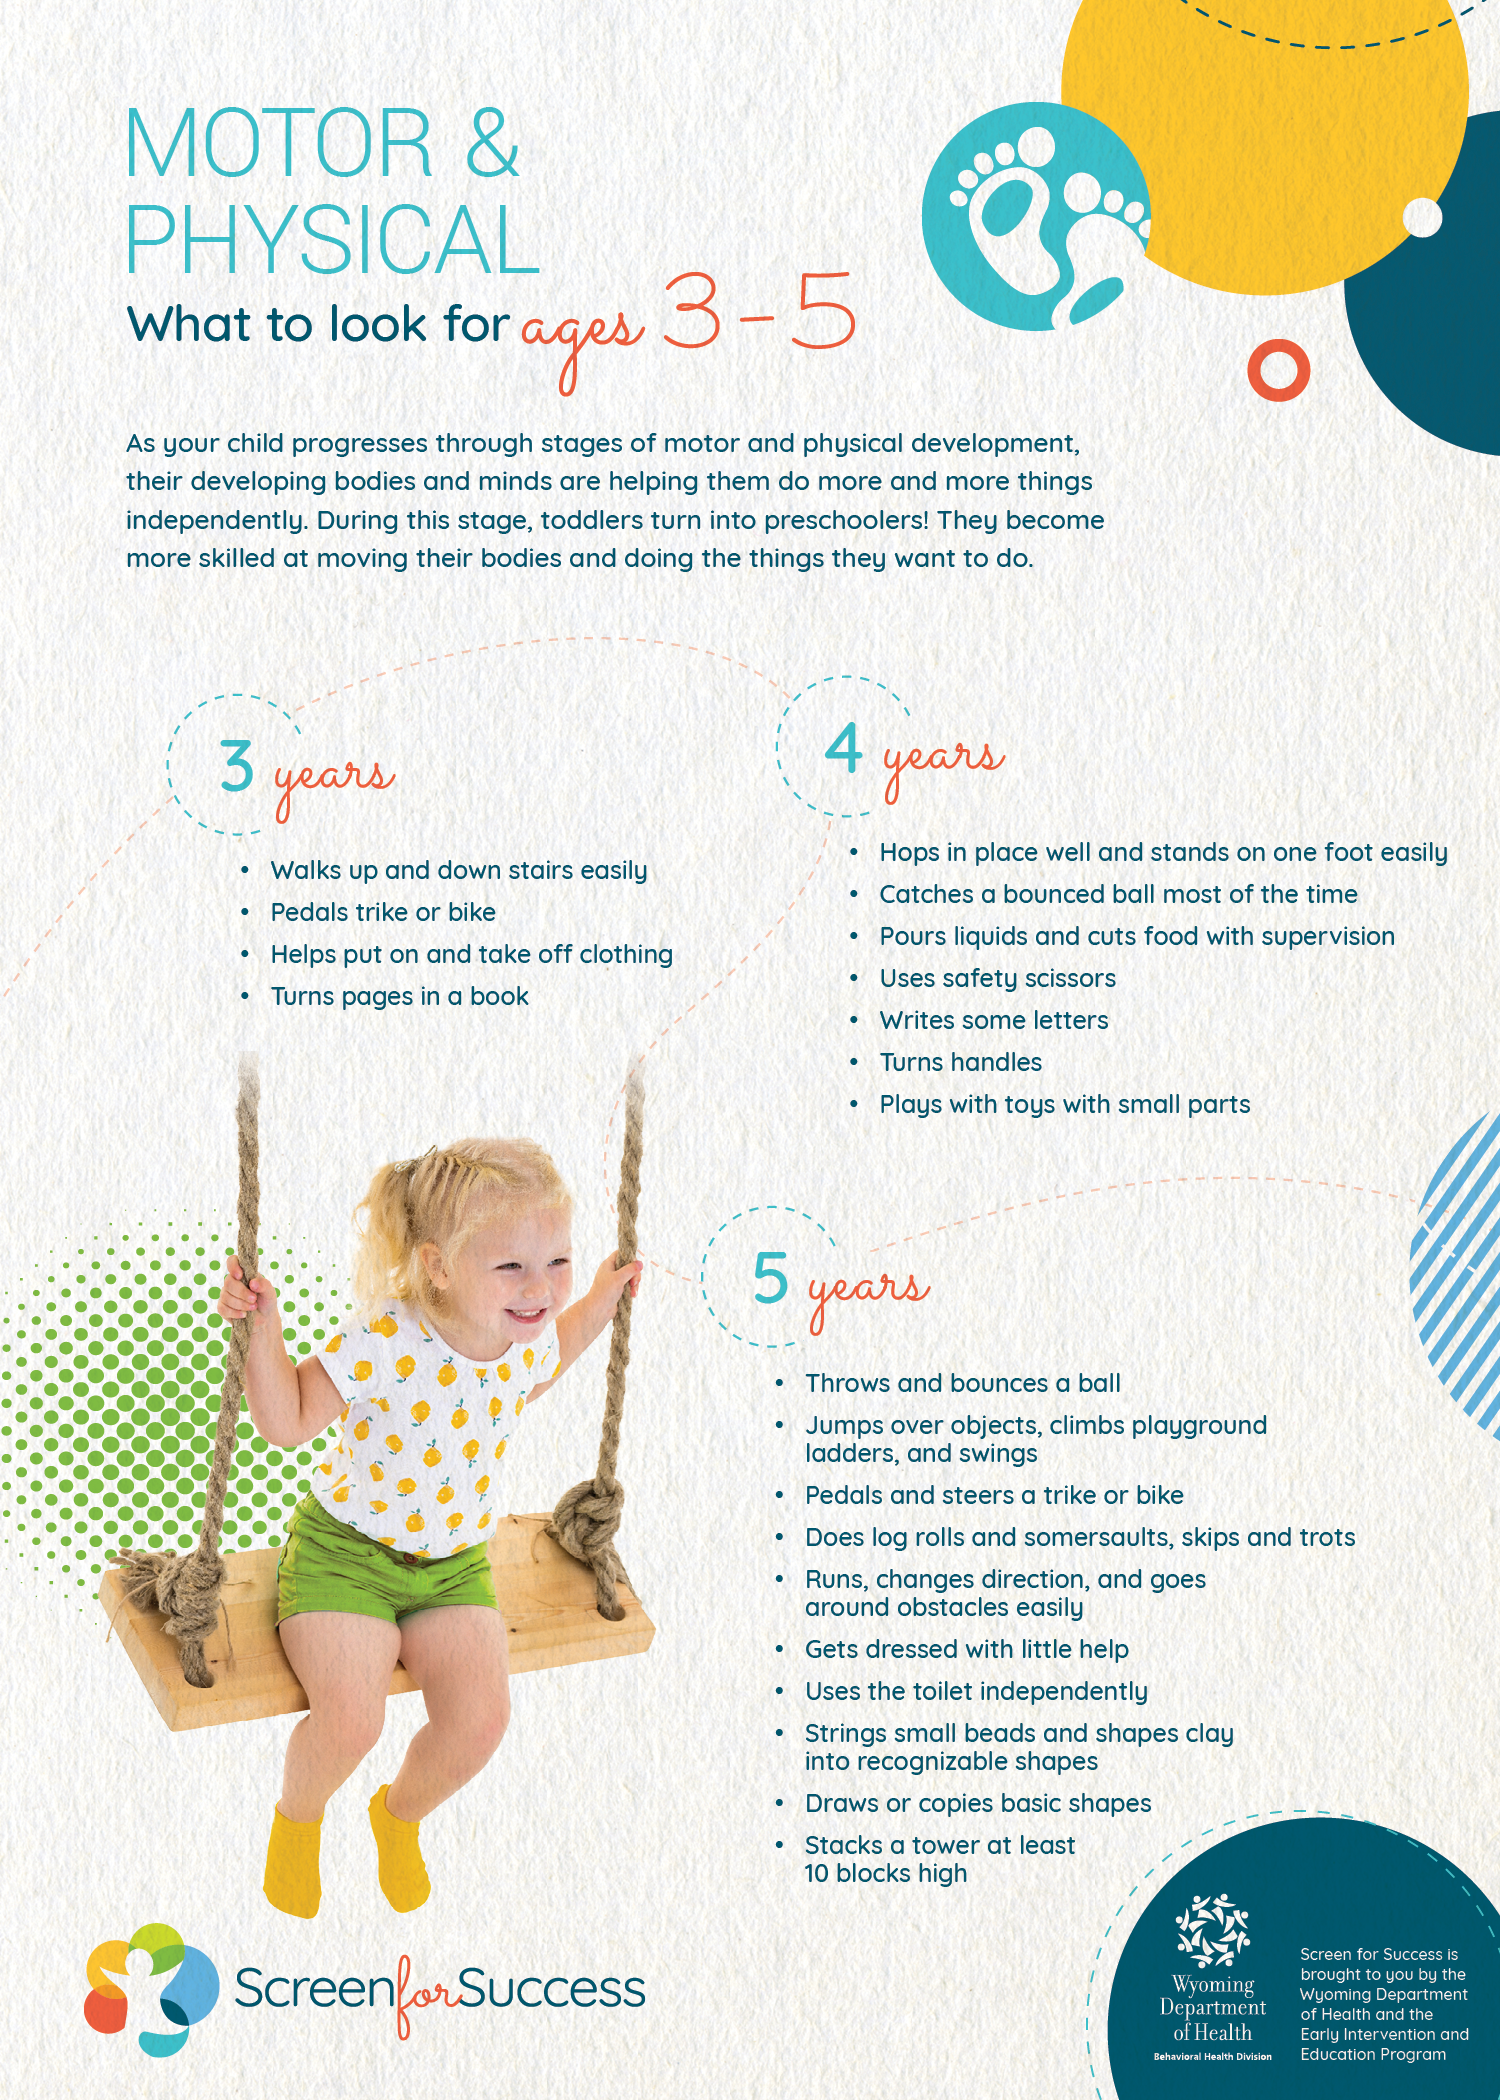 Motor & Physical Development – What to Look for Ages 3 – 5